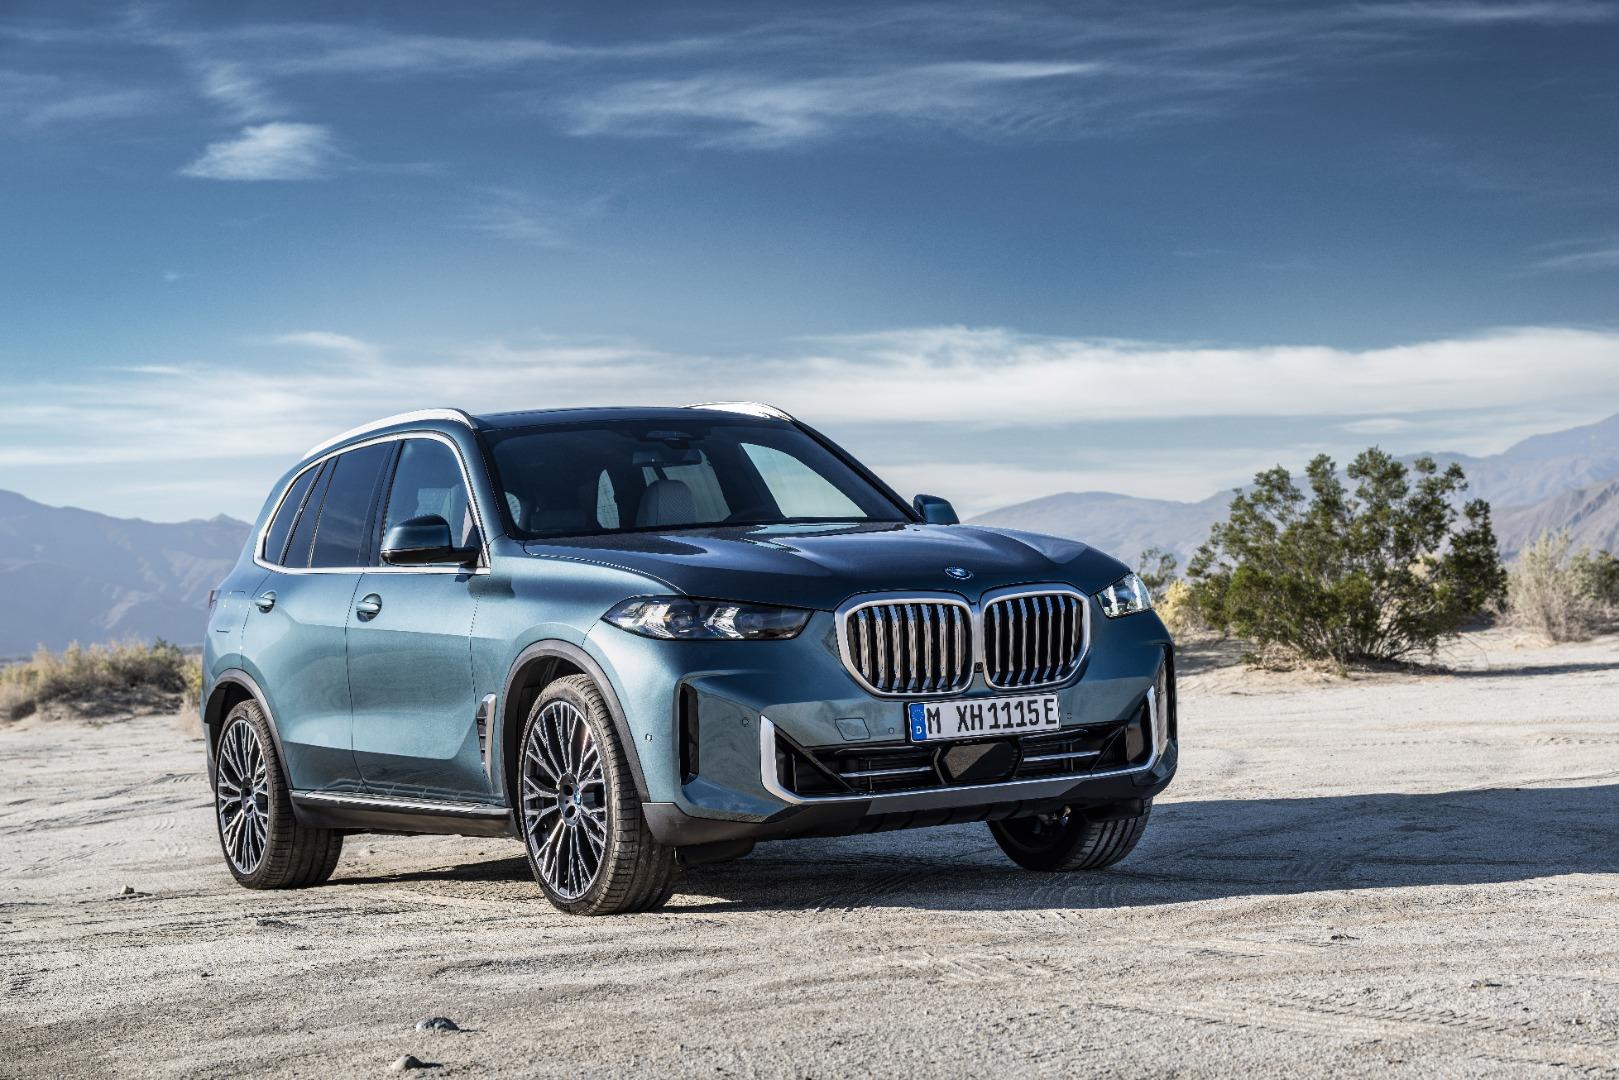 which bmw x5 is better: diesel or petrol?